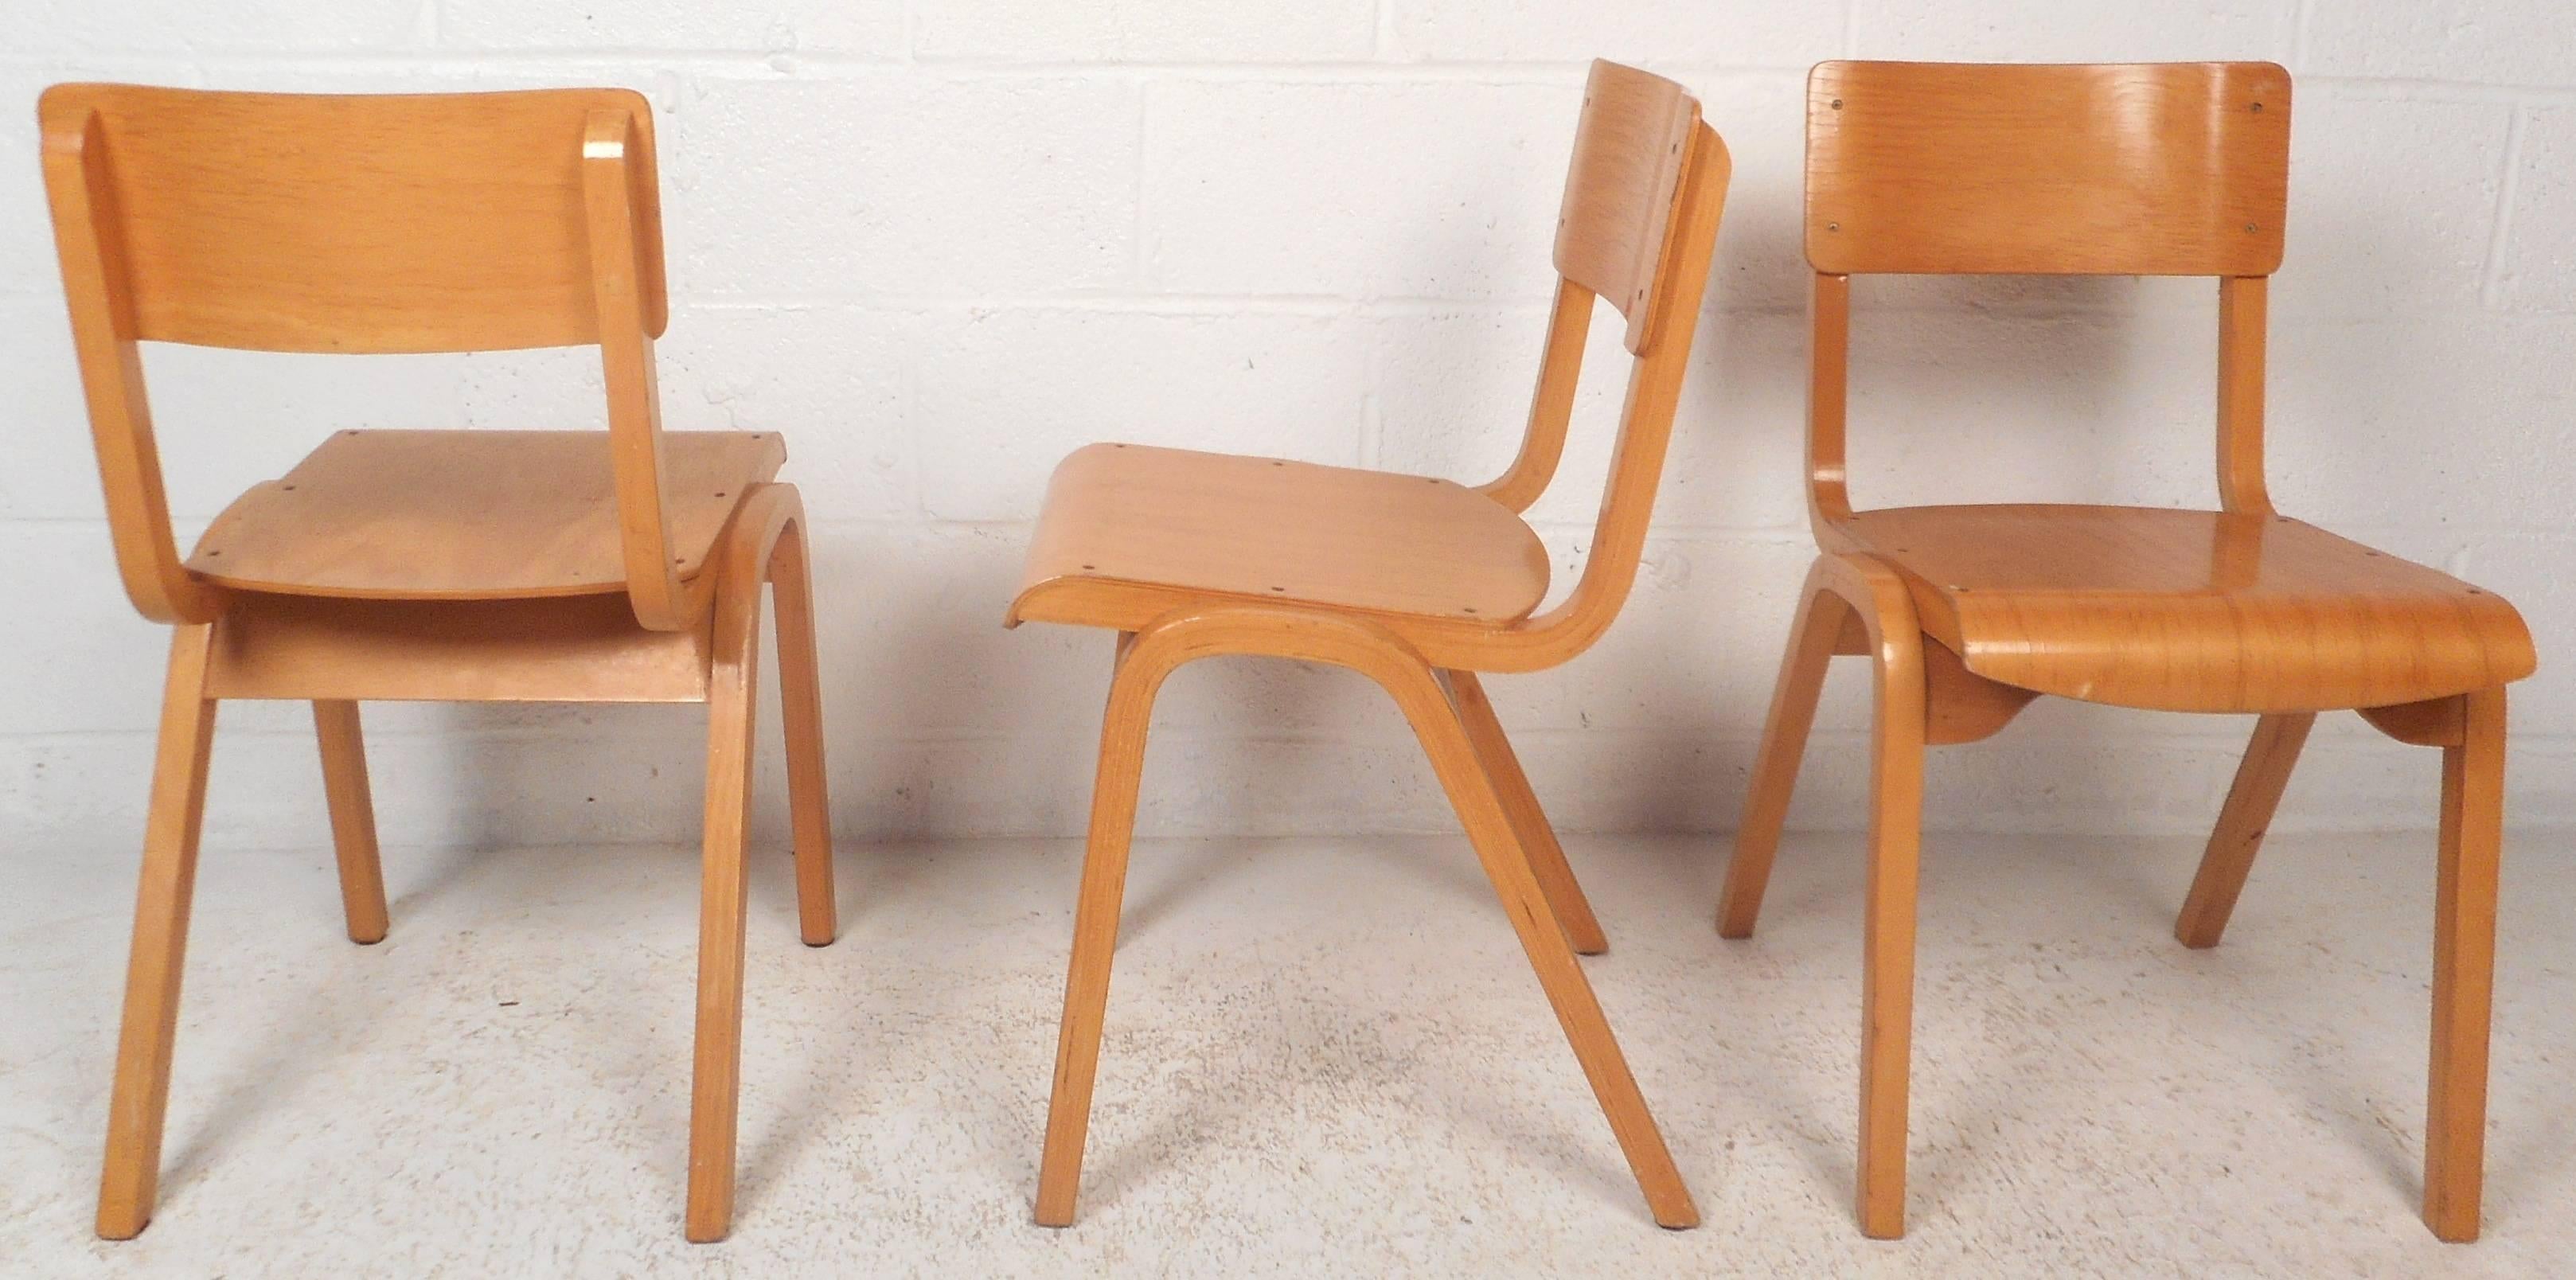 This beautiful set of four vintage modern stacking chairs feature unique angled back legs. The sleek design is made of solid blonde maple wood and offers maximum comfort. Quality craftsmanship with smooth rounded seating and back rests. This elegant